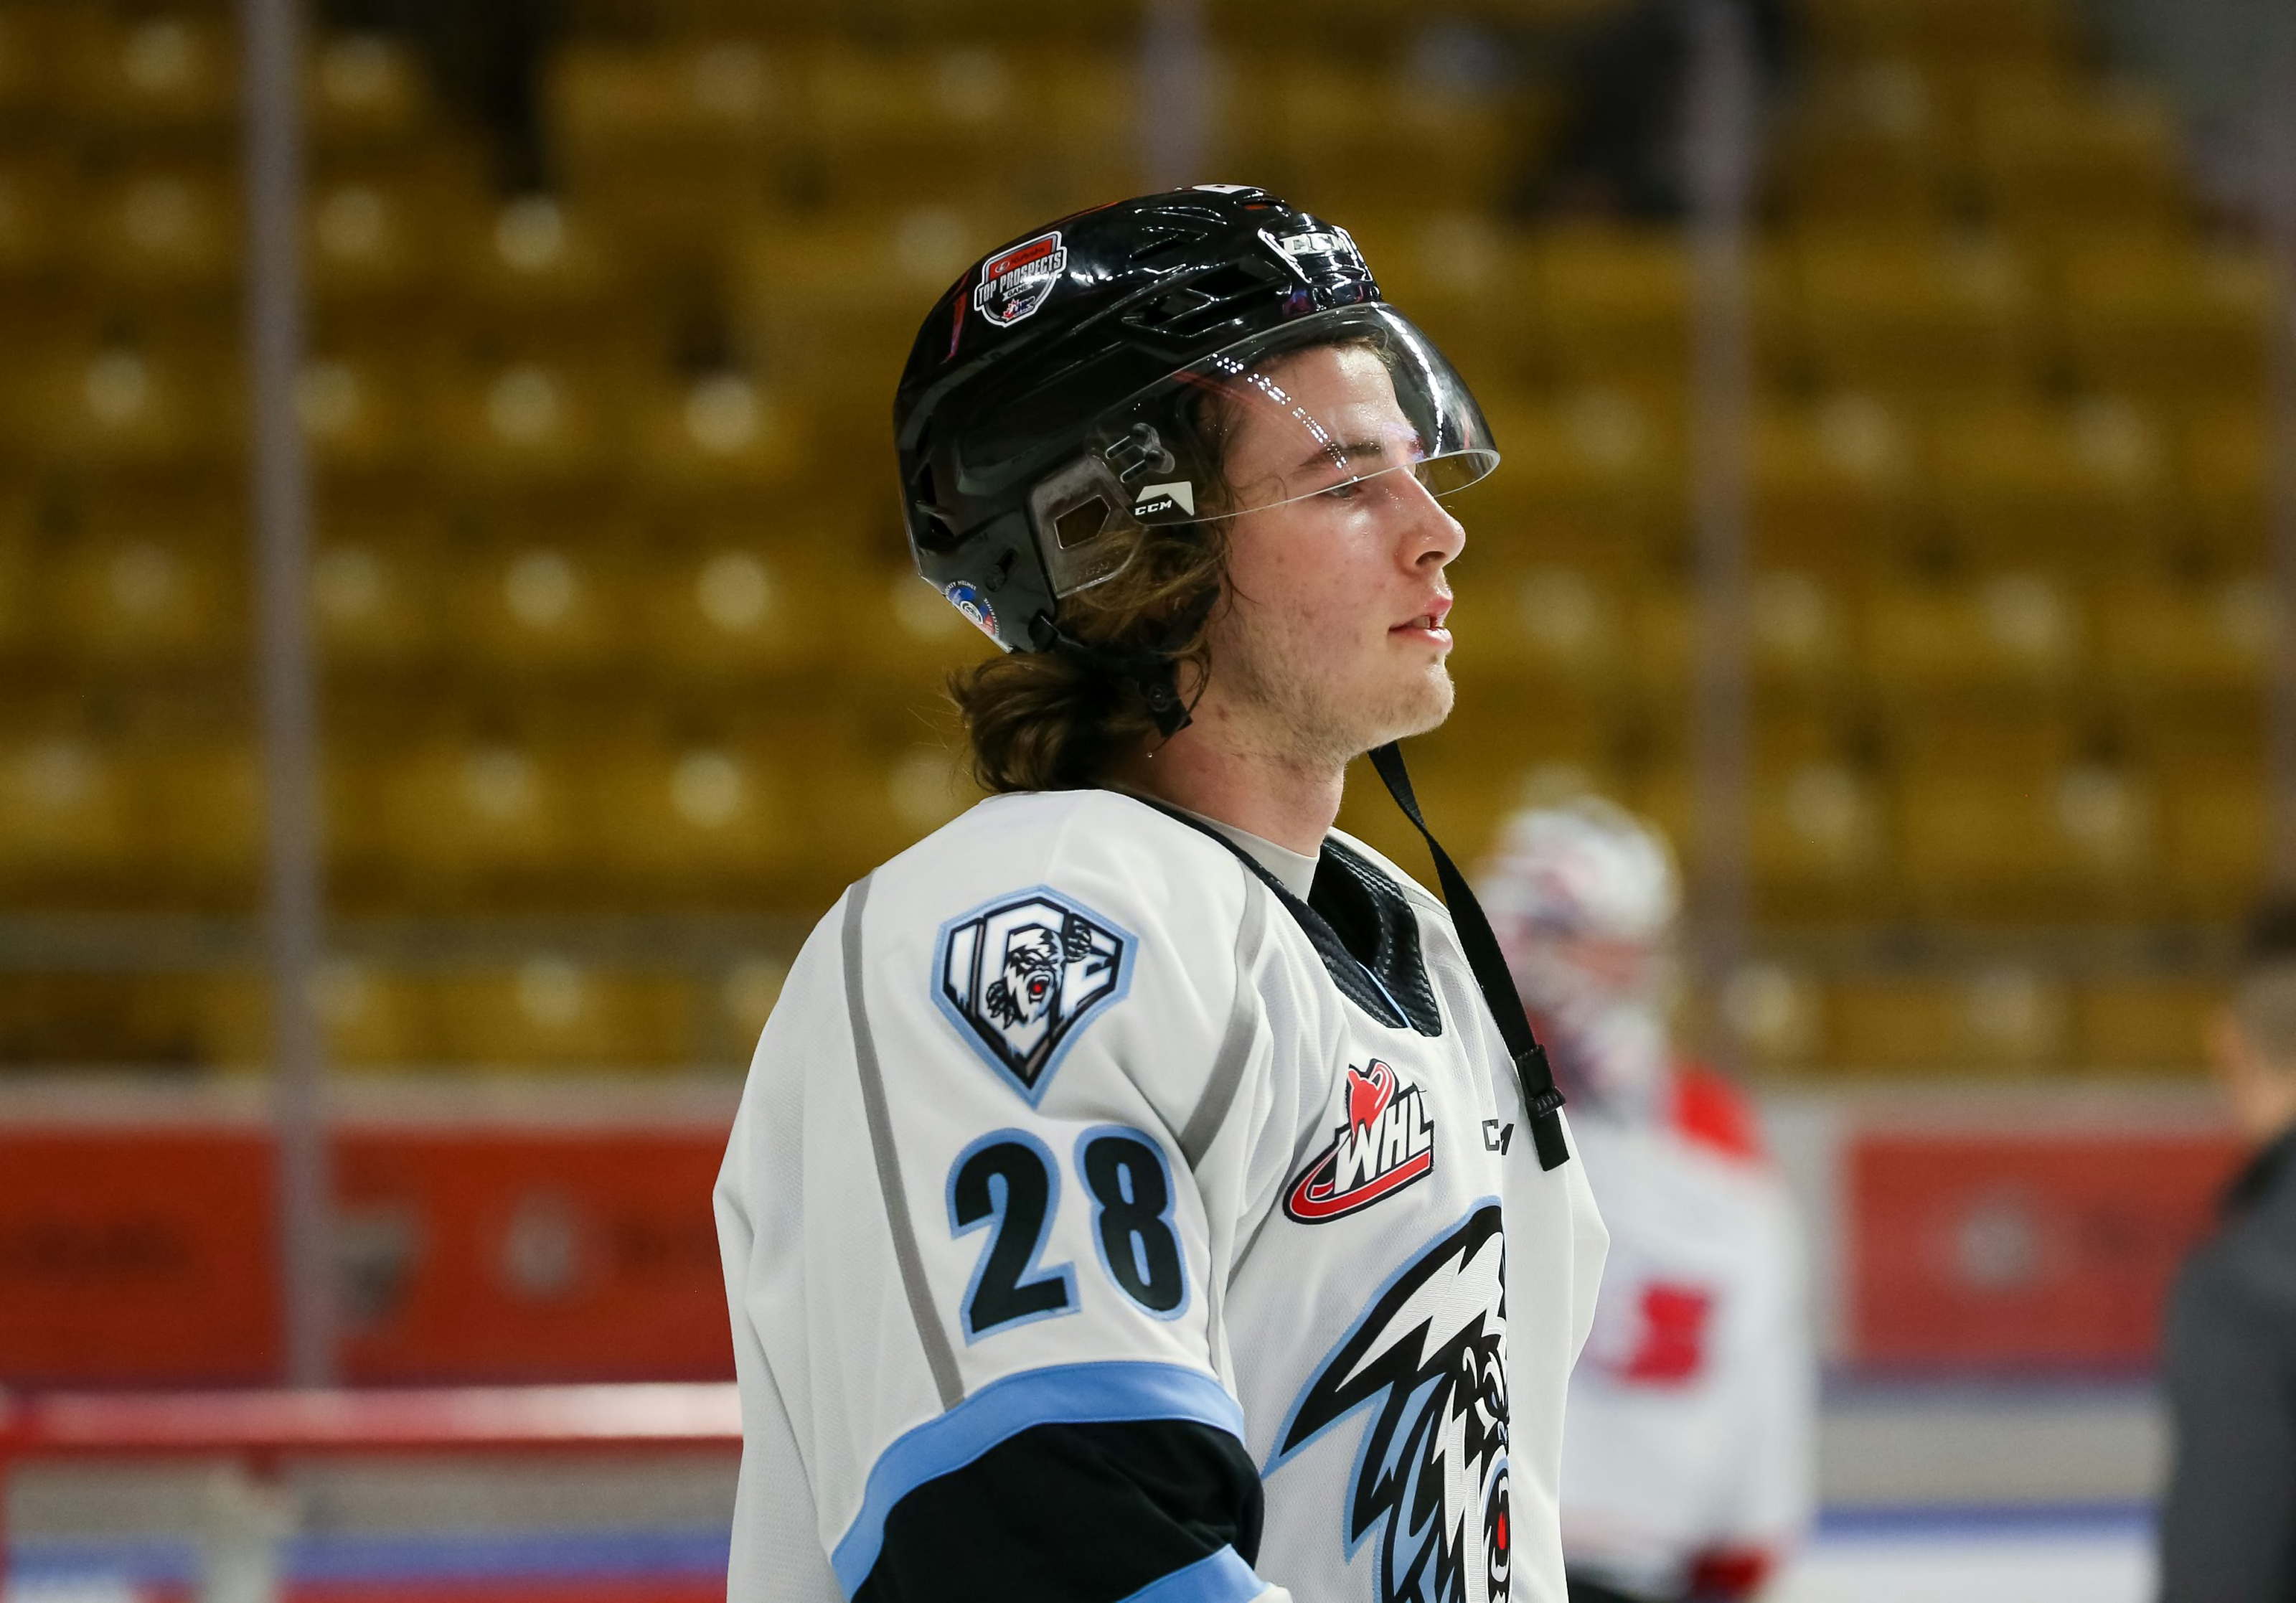 Center of Attention: Cutter Gauthier - The Hockey News